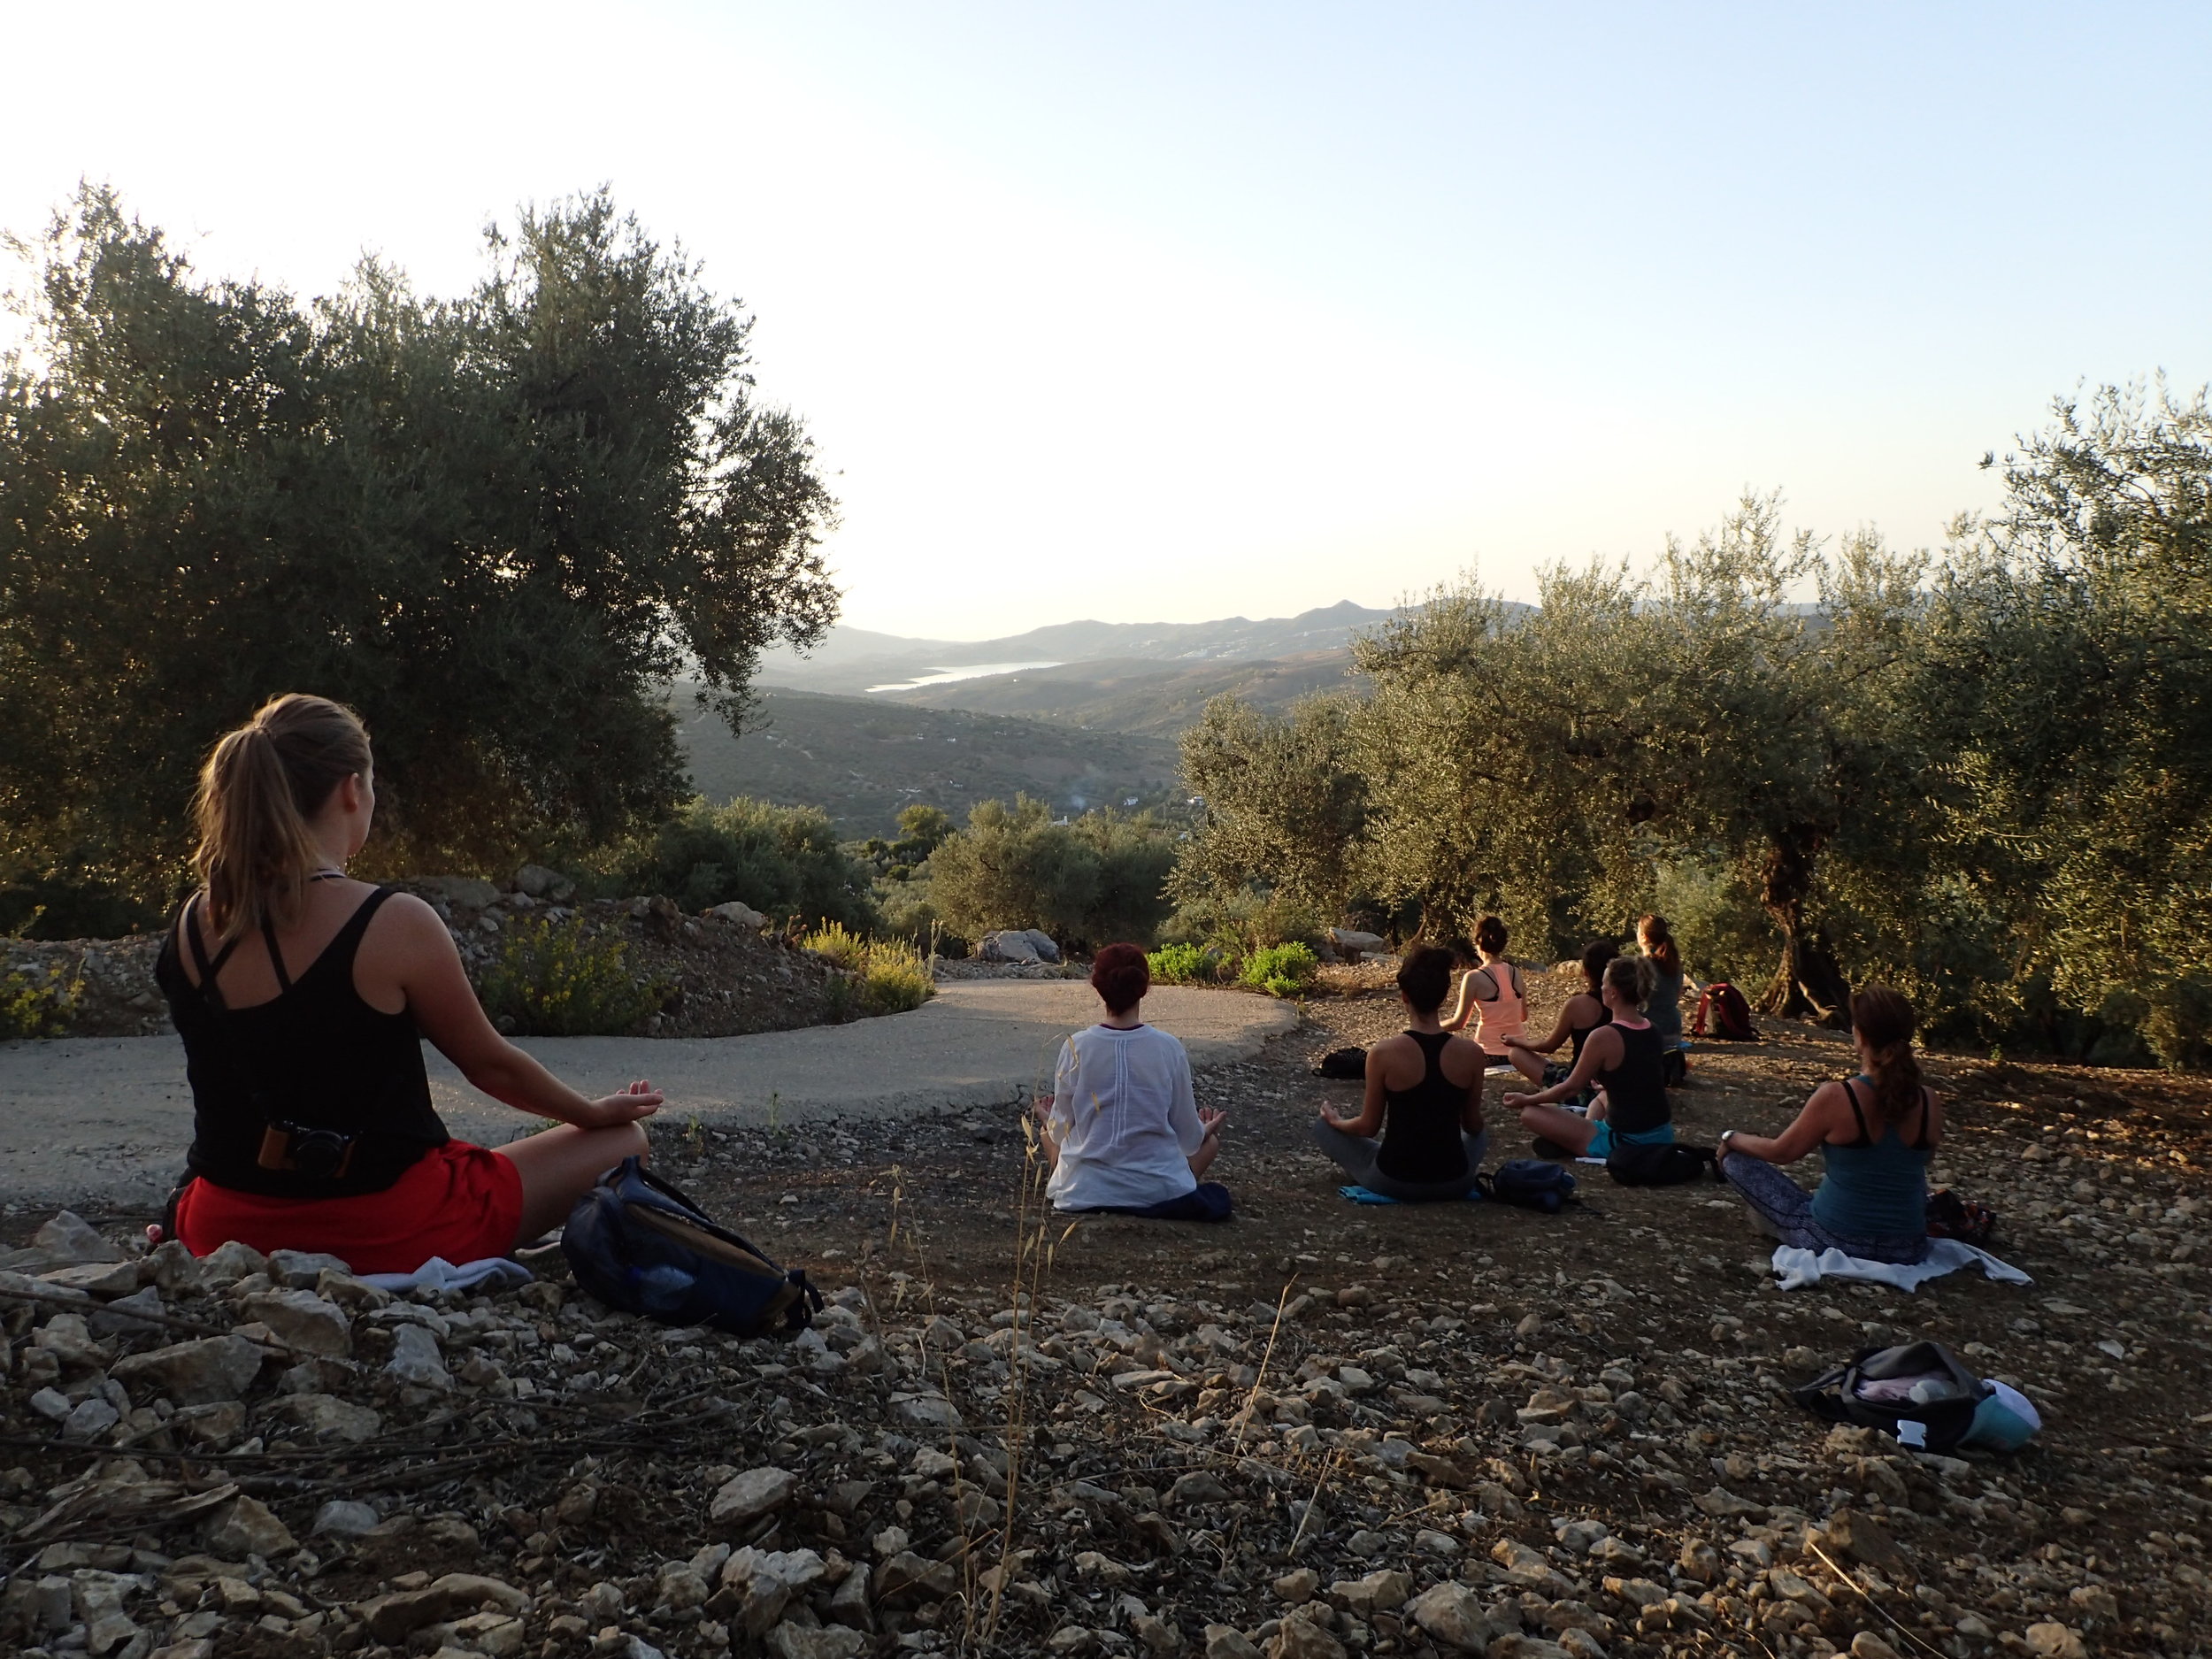 Meditation on the mountain at Yin Yang Yoga retreat in the Malaga mountains in Spain with Jane Bakx Yoga